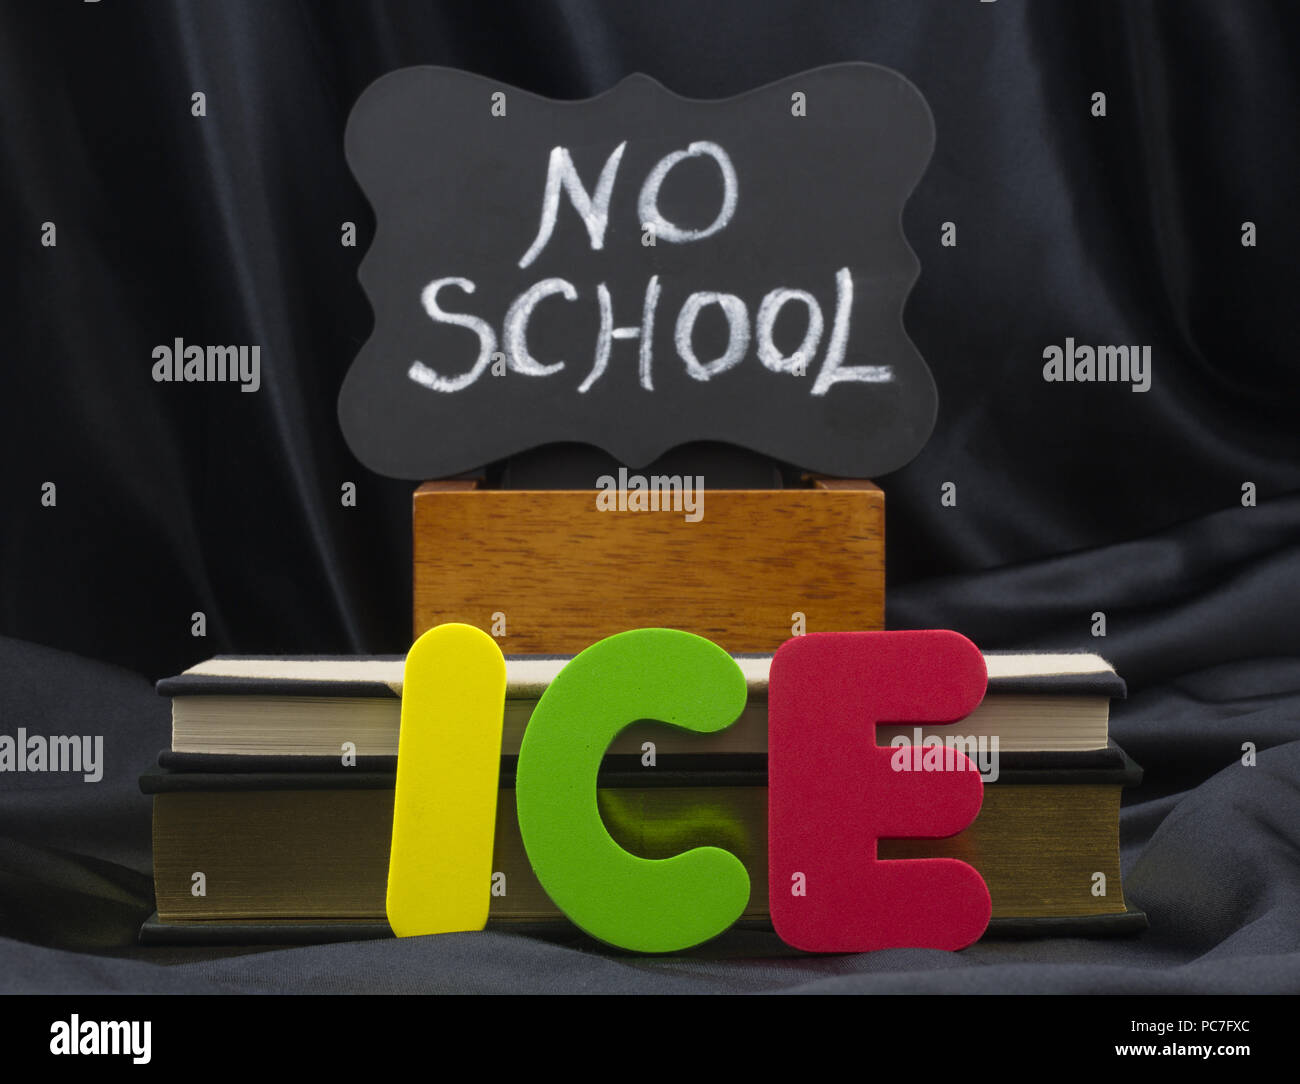 ICE in letters with NO SCHOOL on small chalkboard with books and black satin background. Icy weather conditions create danger and school closings. Stock Photo